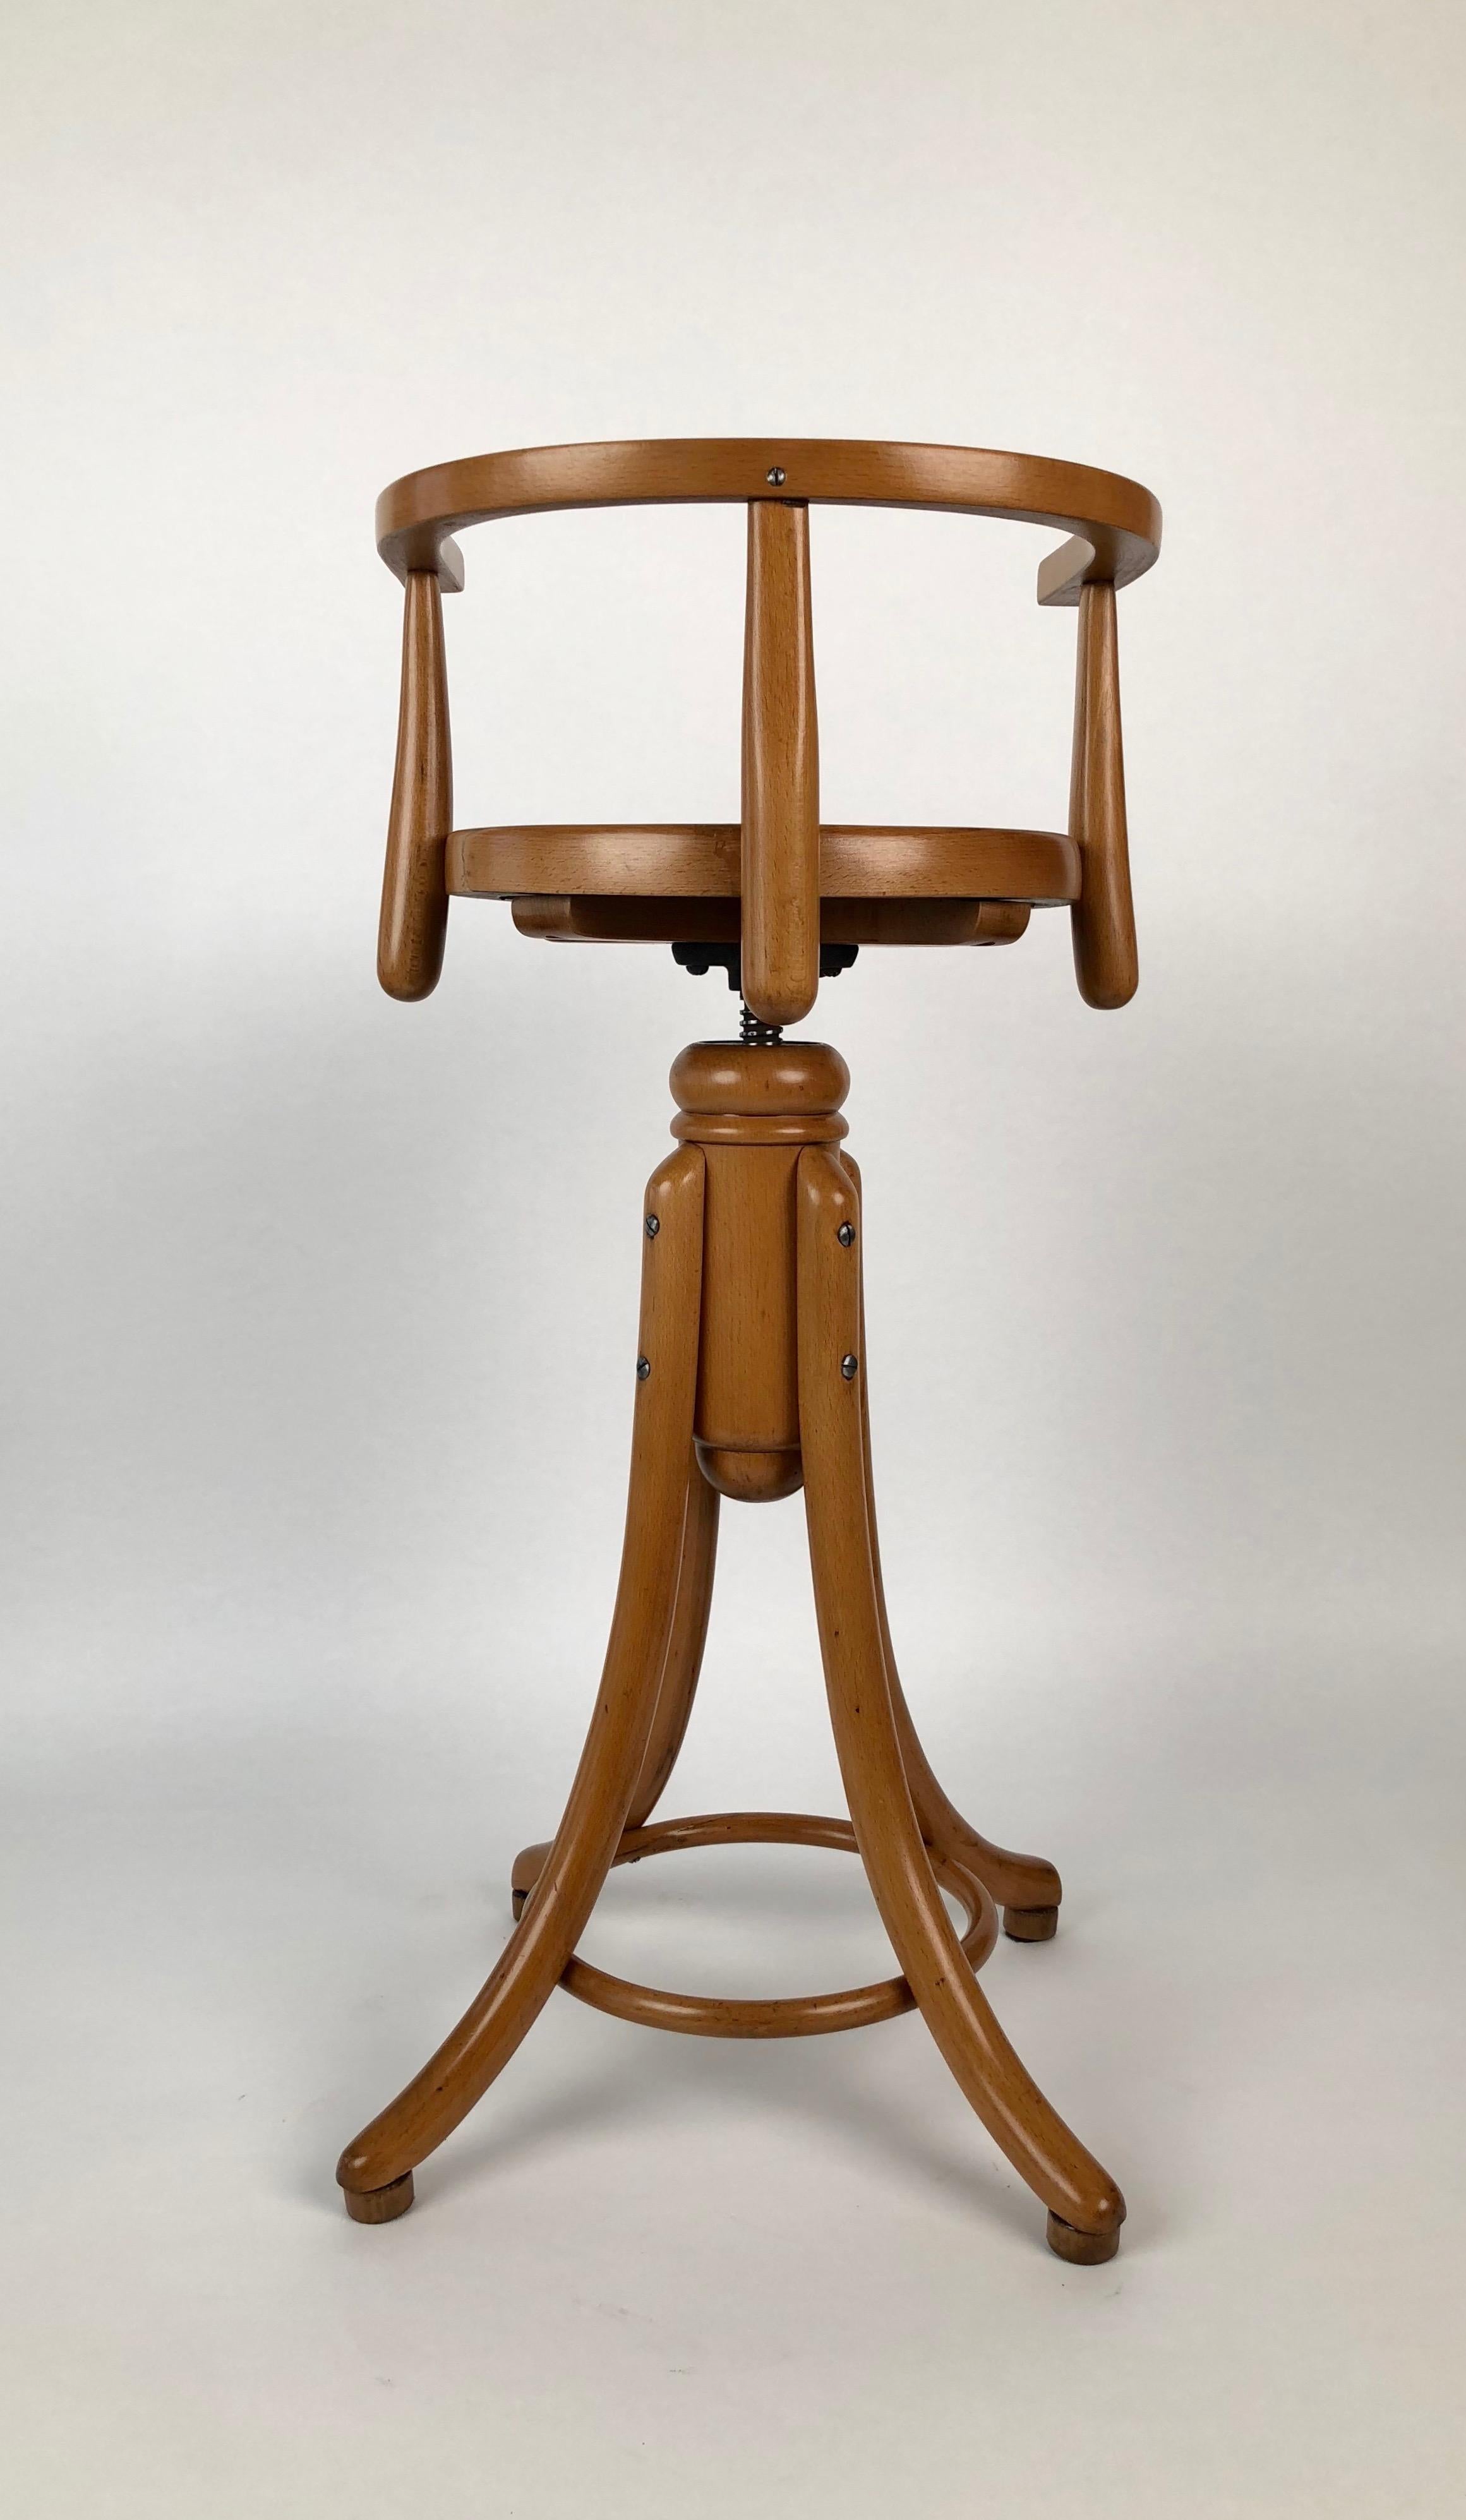 Children's stool for a barber shop, made in beech wood from the company Thonet.
Adjustable from the minimum seat height of 69 cm to the maximum seat height of 80 cm.
The stool has been restored.
  
   